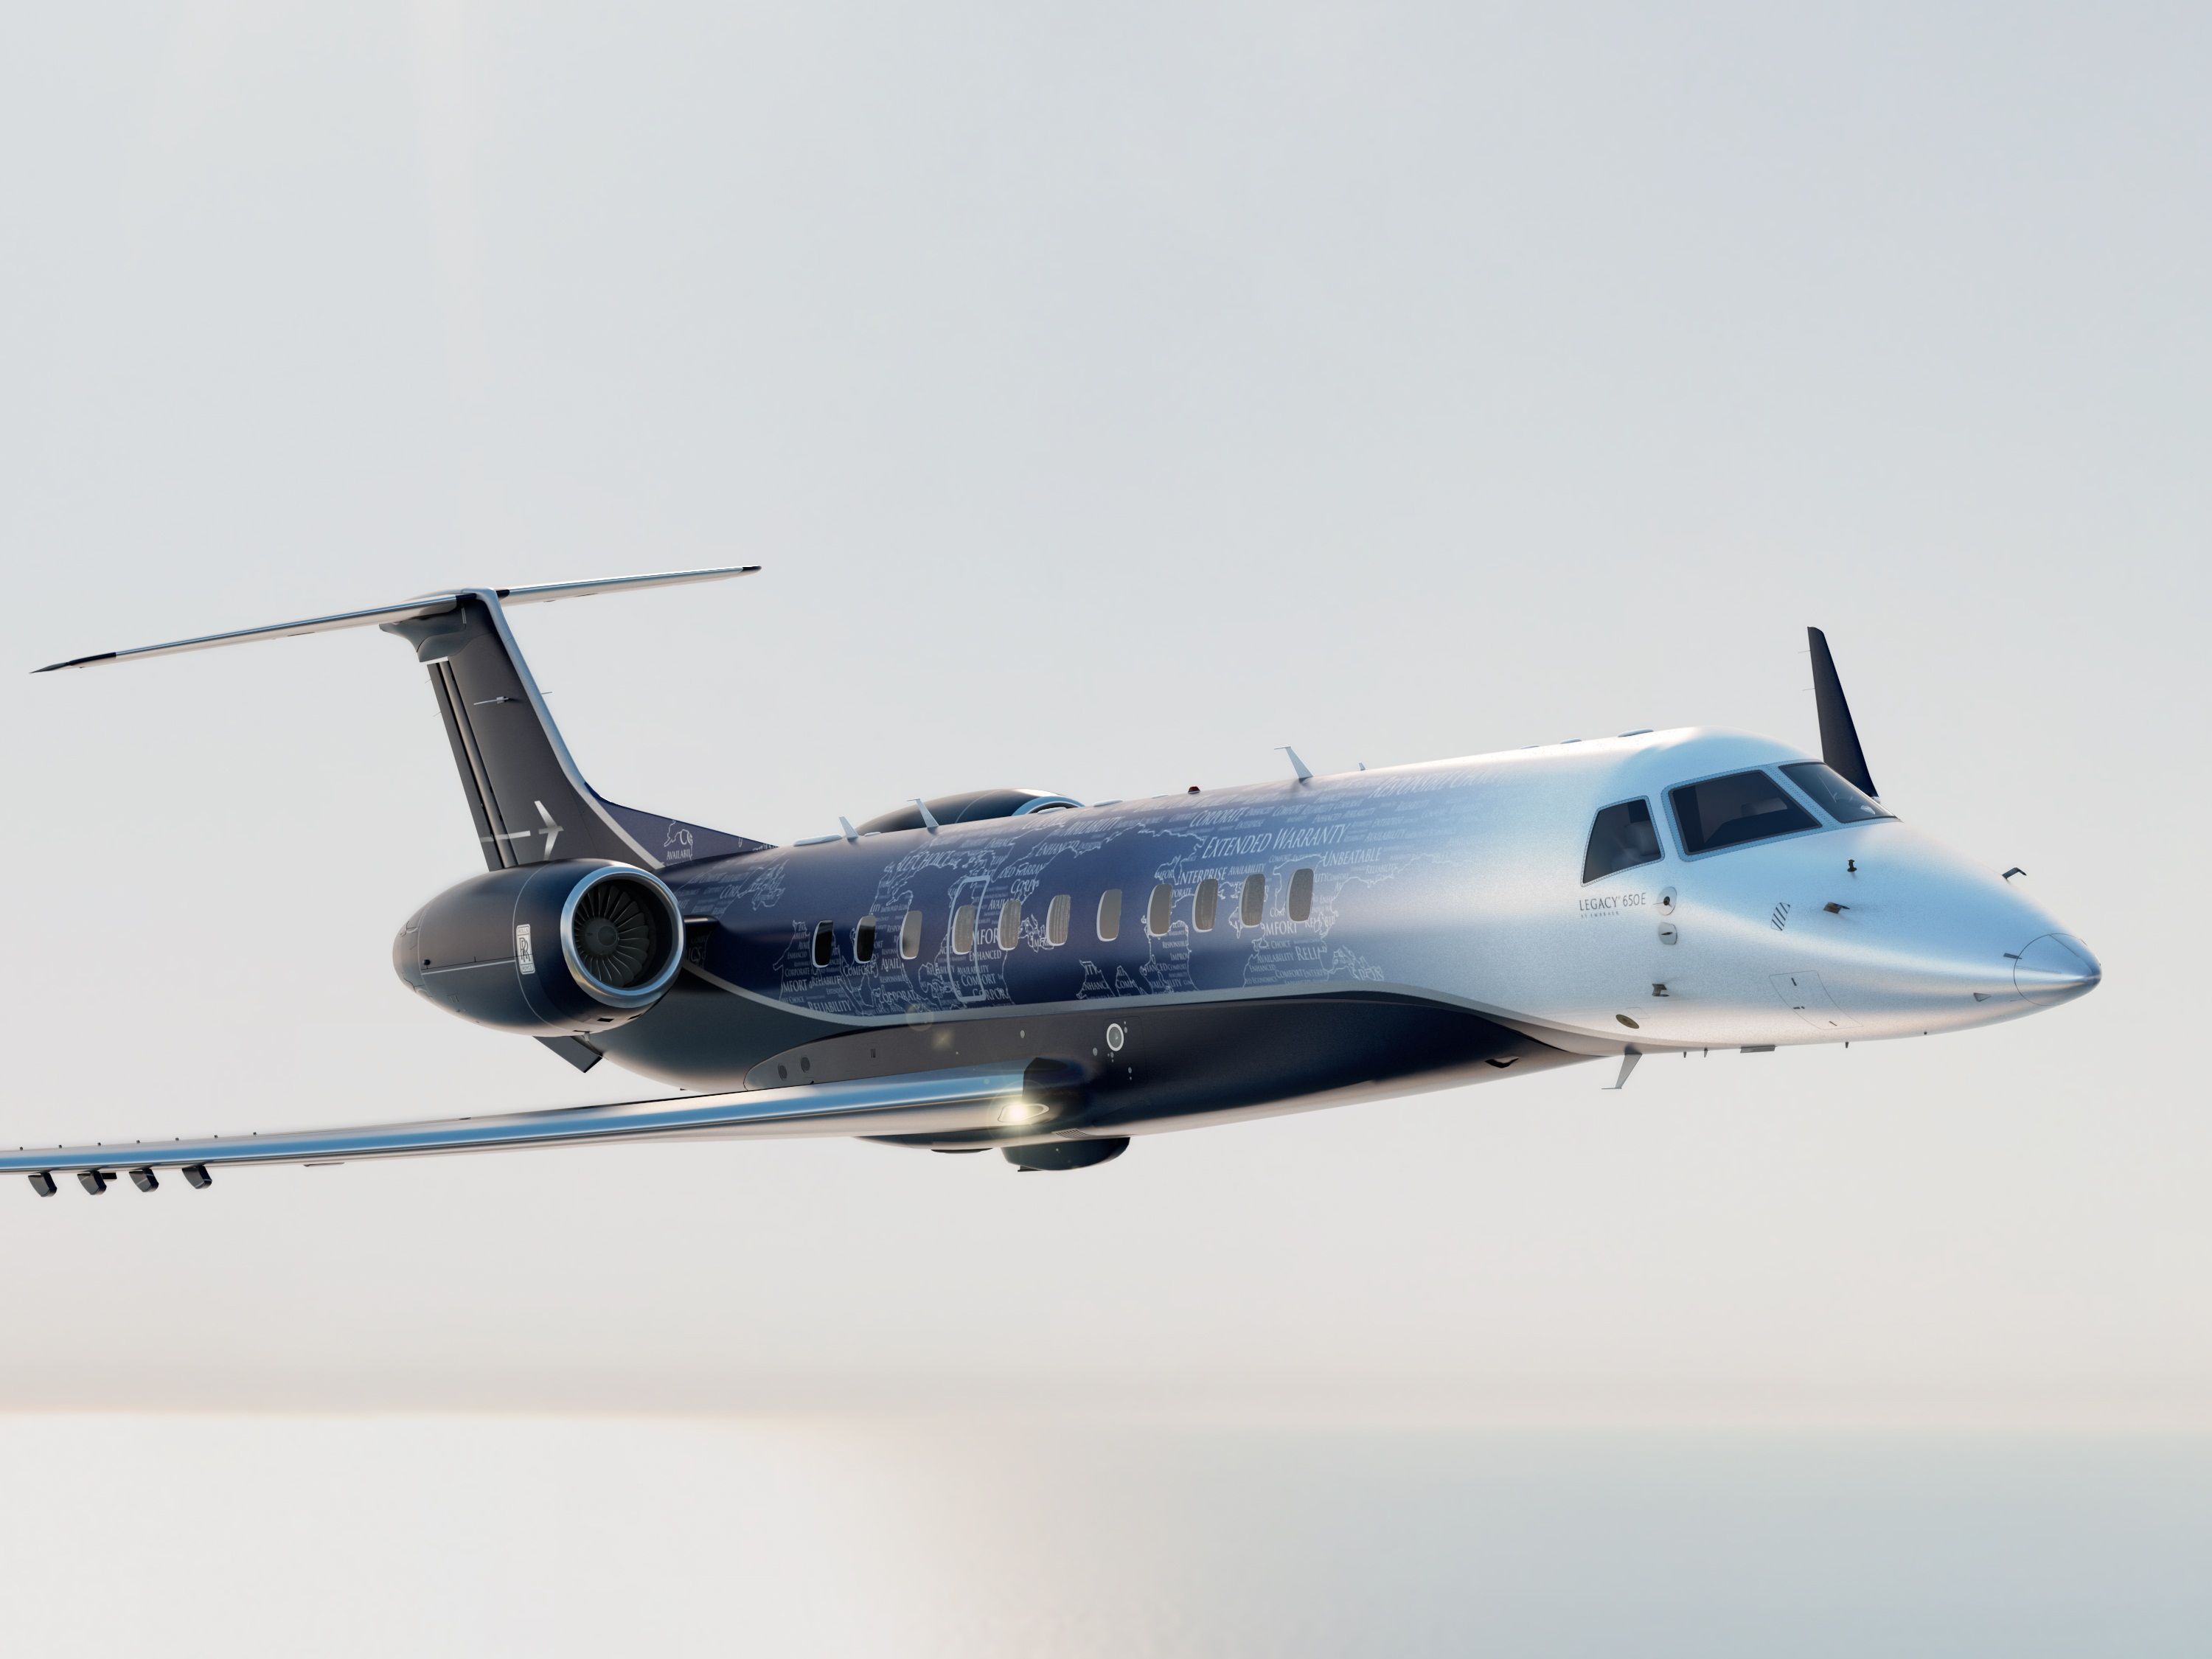 An Embraer Legacy 650E flying in the sky.